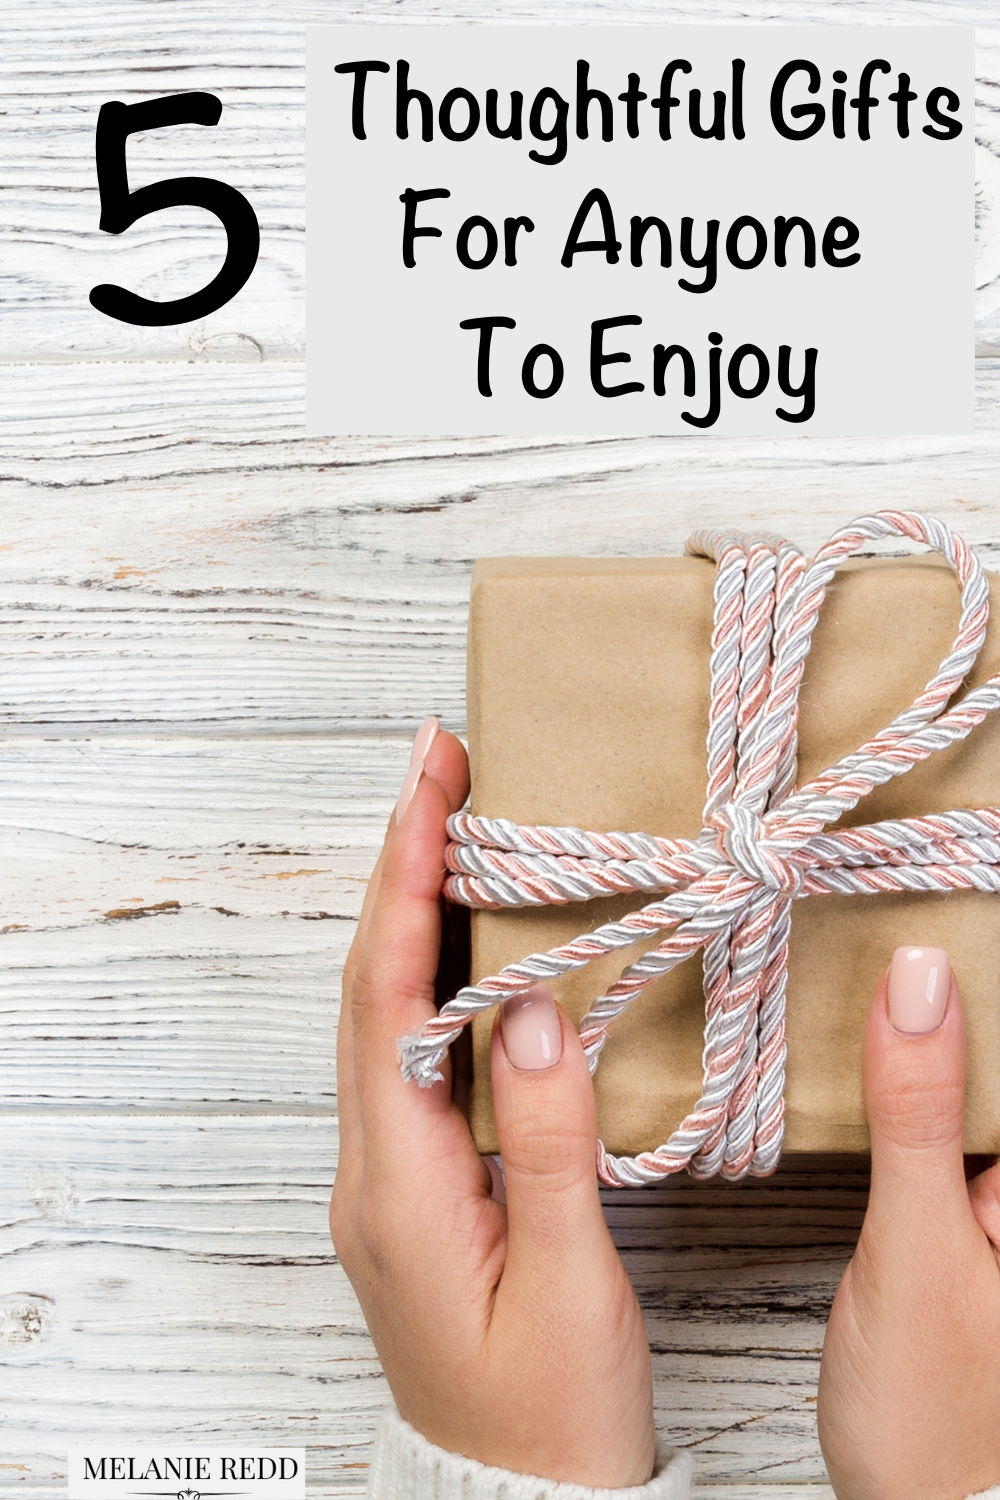 There is something so fun about celebrating with those we love. Gifts are a part of this. Here are 5 Thoughtful Gifts For Anyone To Enjoy.